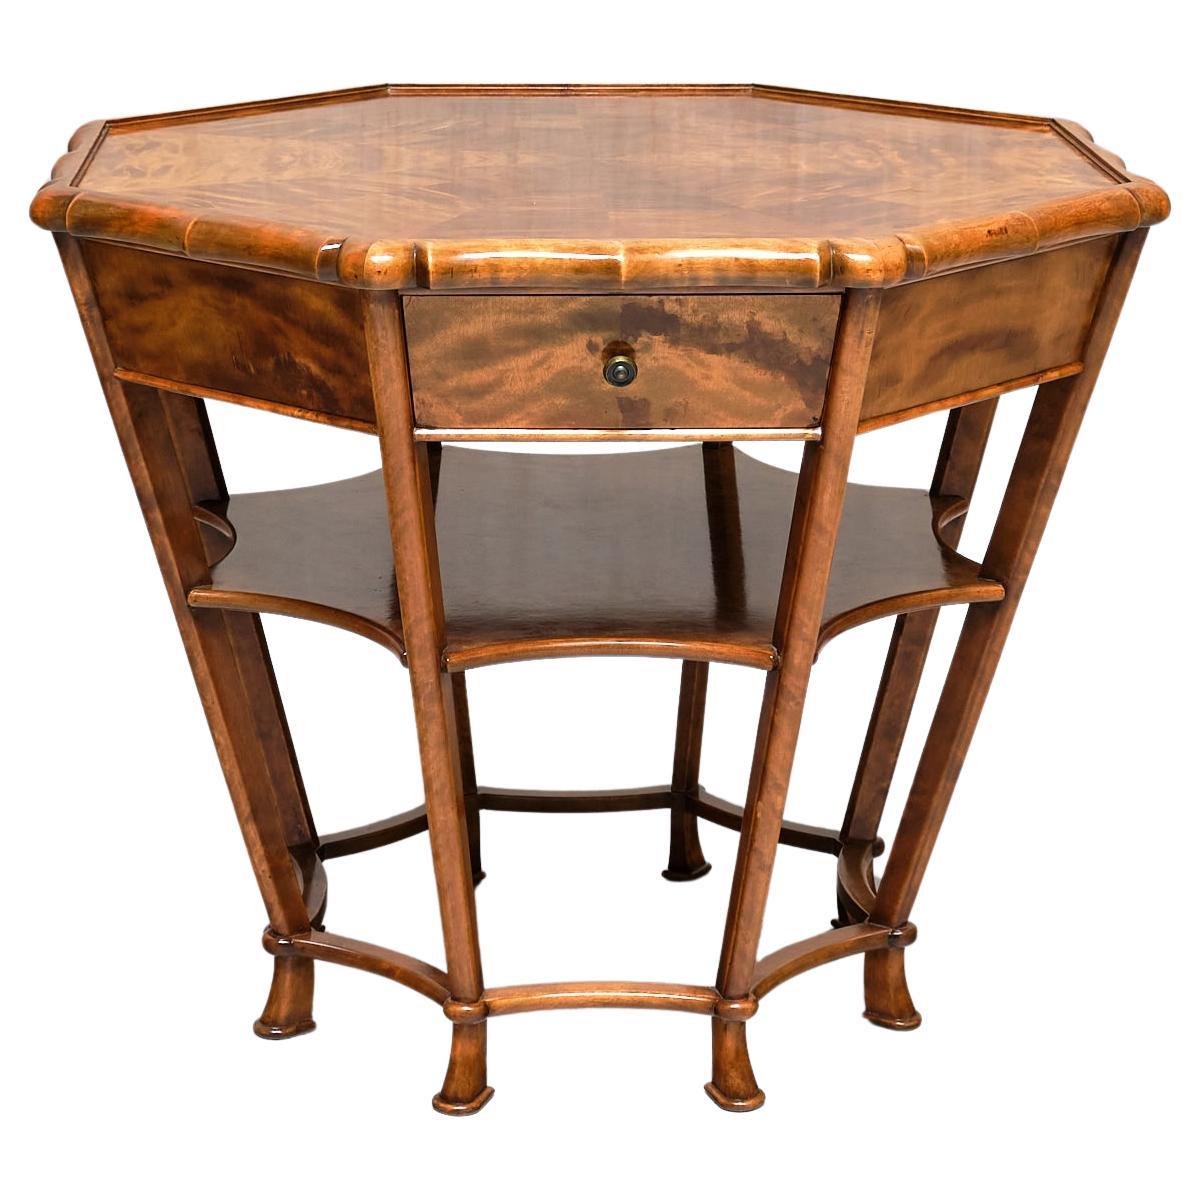 Exceptional Expressionist Octagonal Center Table in Flamed Birch, Germany, 1920s